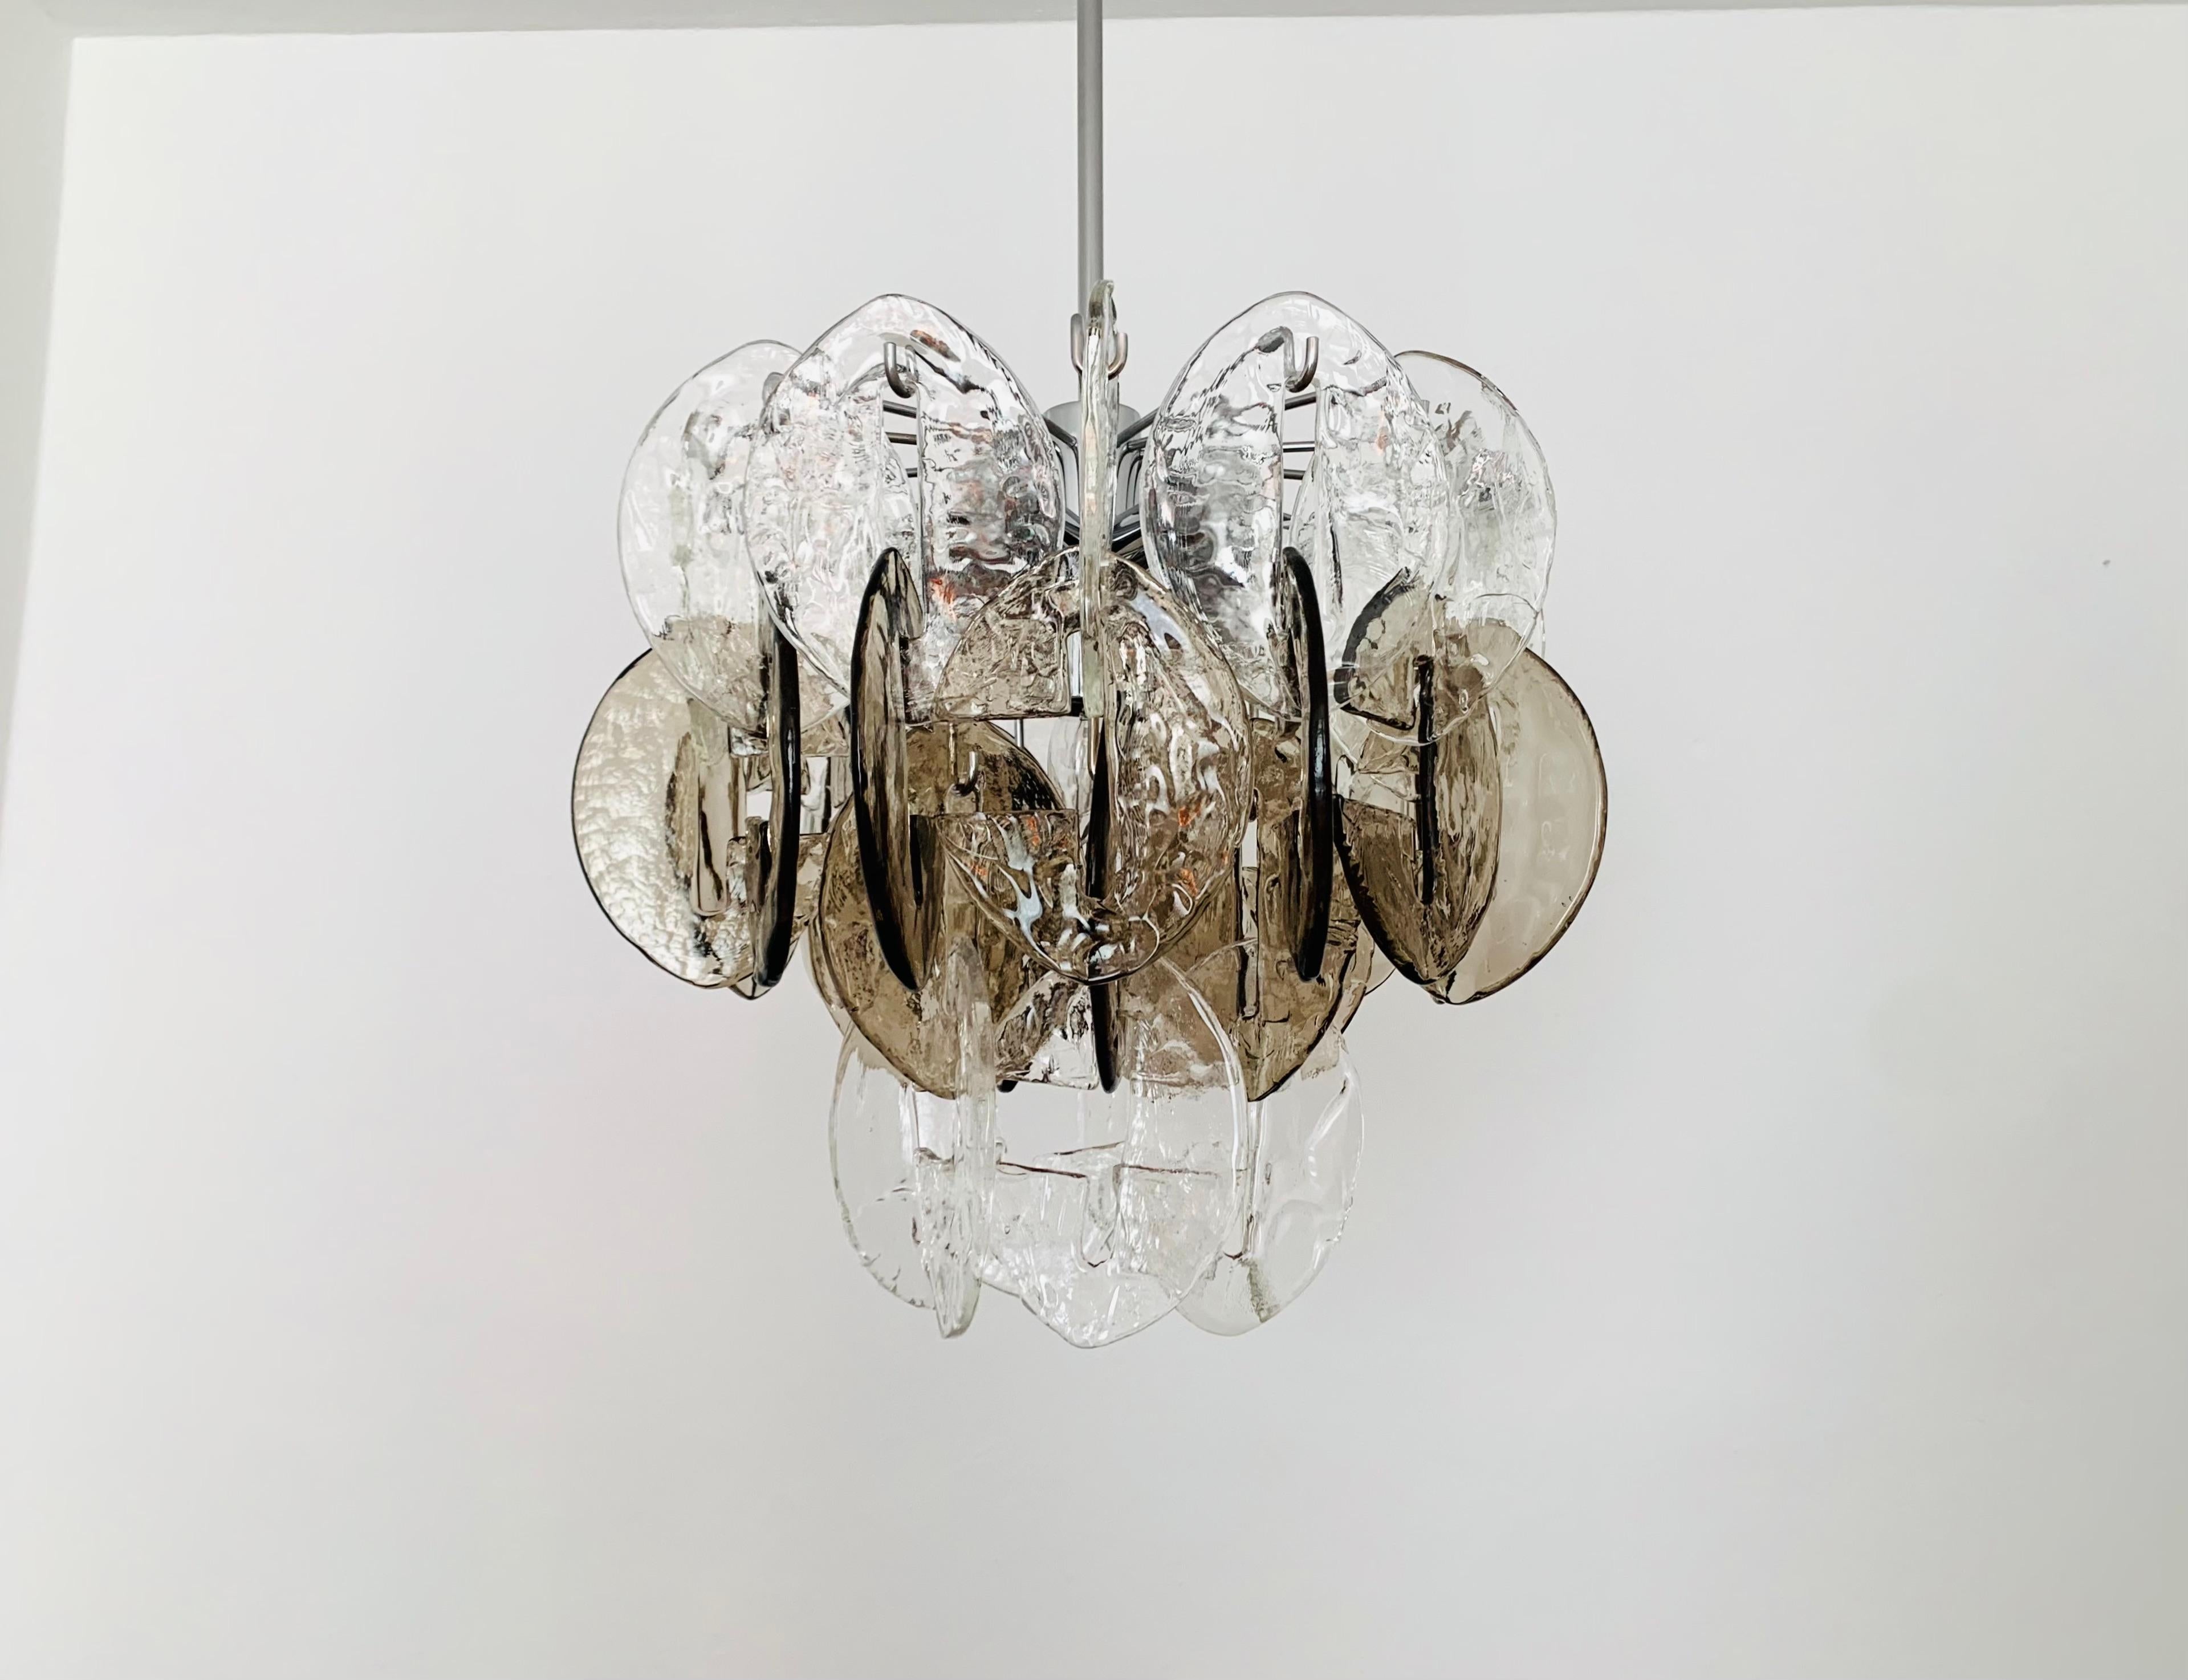 Very beautiful and large Murano glass chandelier from the 1960s.
High-quality workmanship and fantastic design.
The structure of the 32 glasses creates a very sparkling light.

Manufacturer: Kalmar Franken KG
Design: Carlo Nason

Condition:

Very